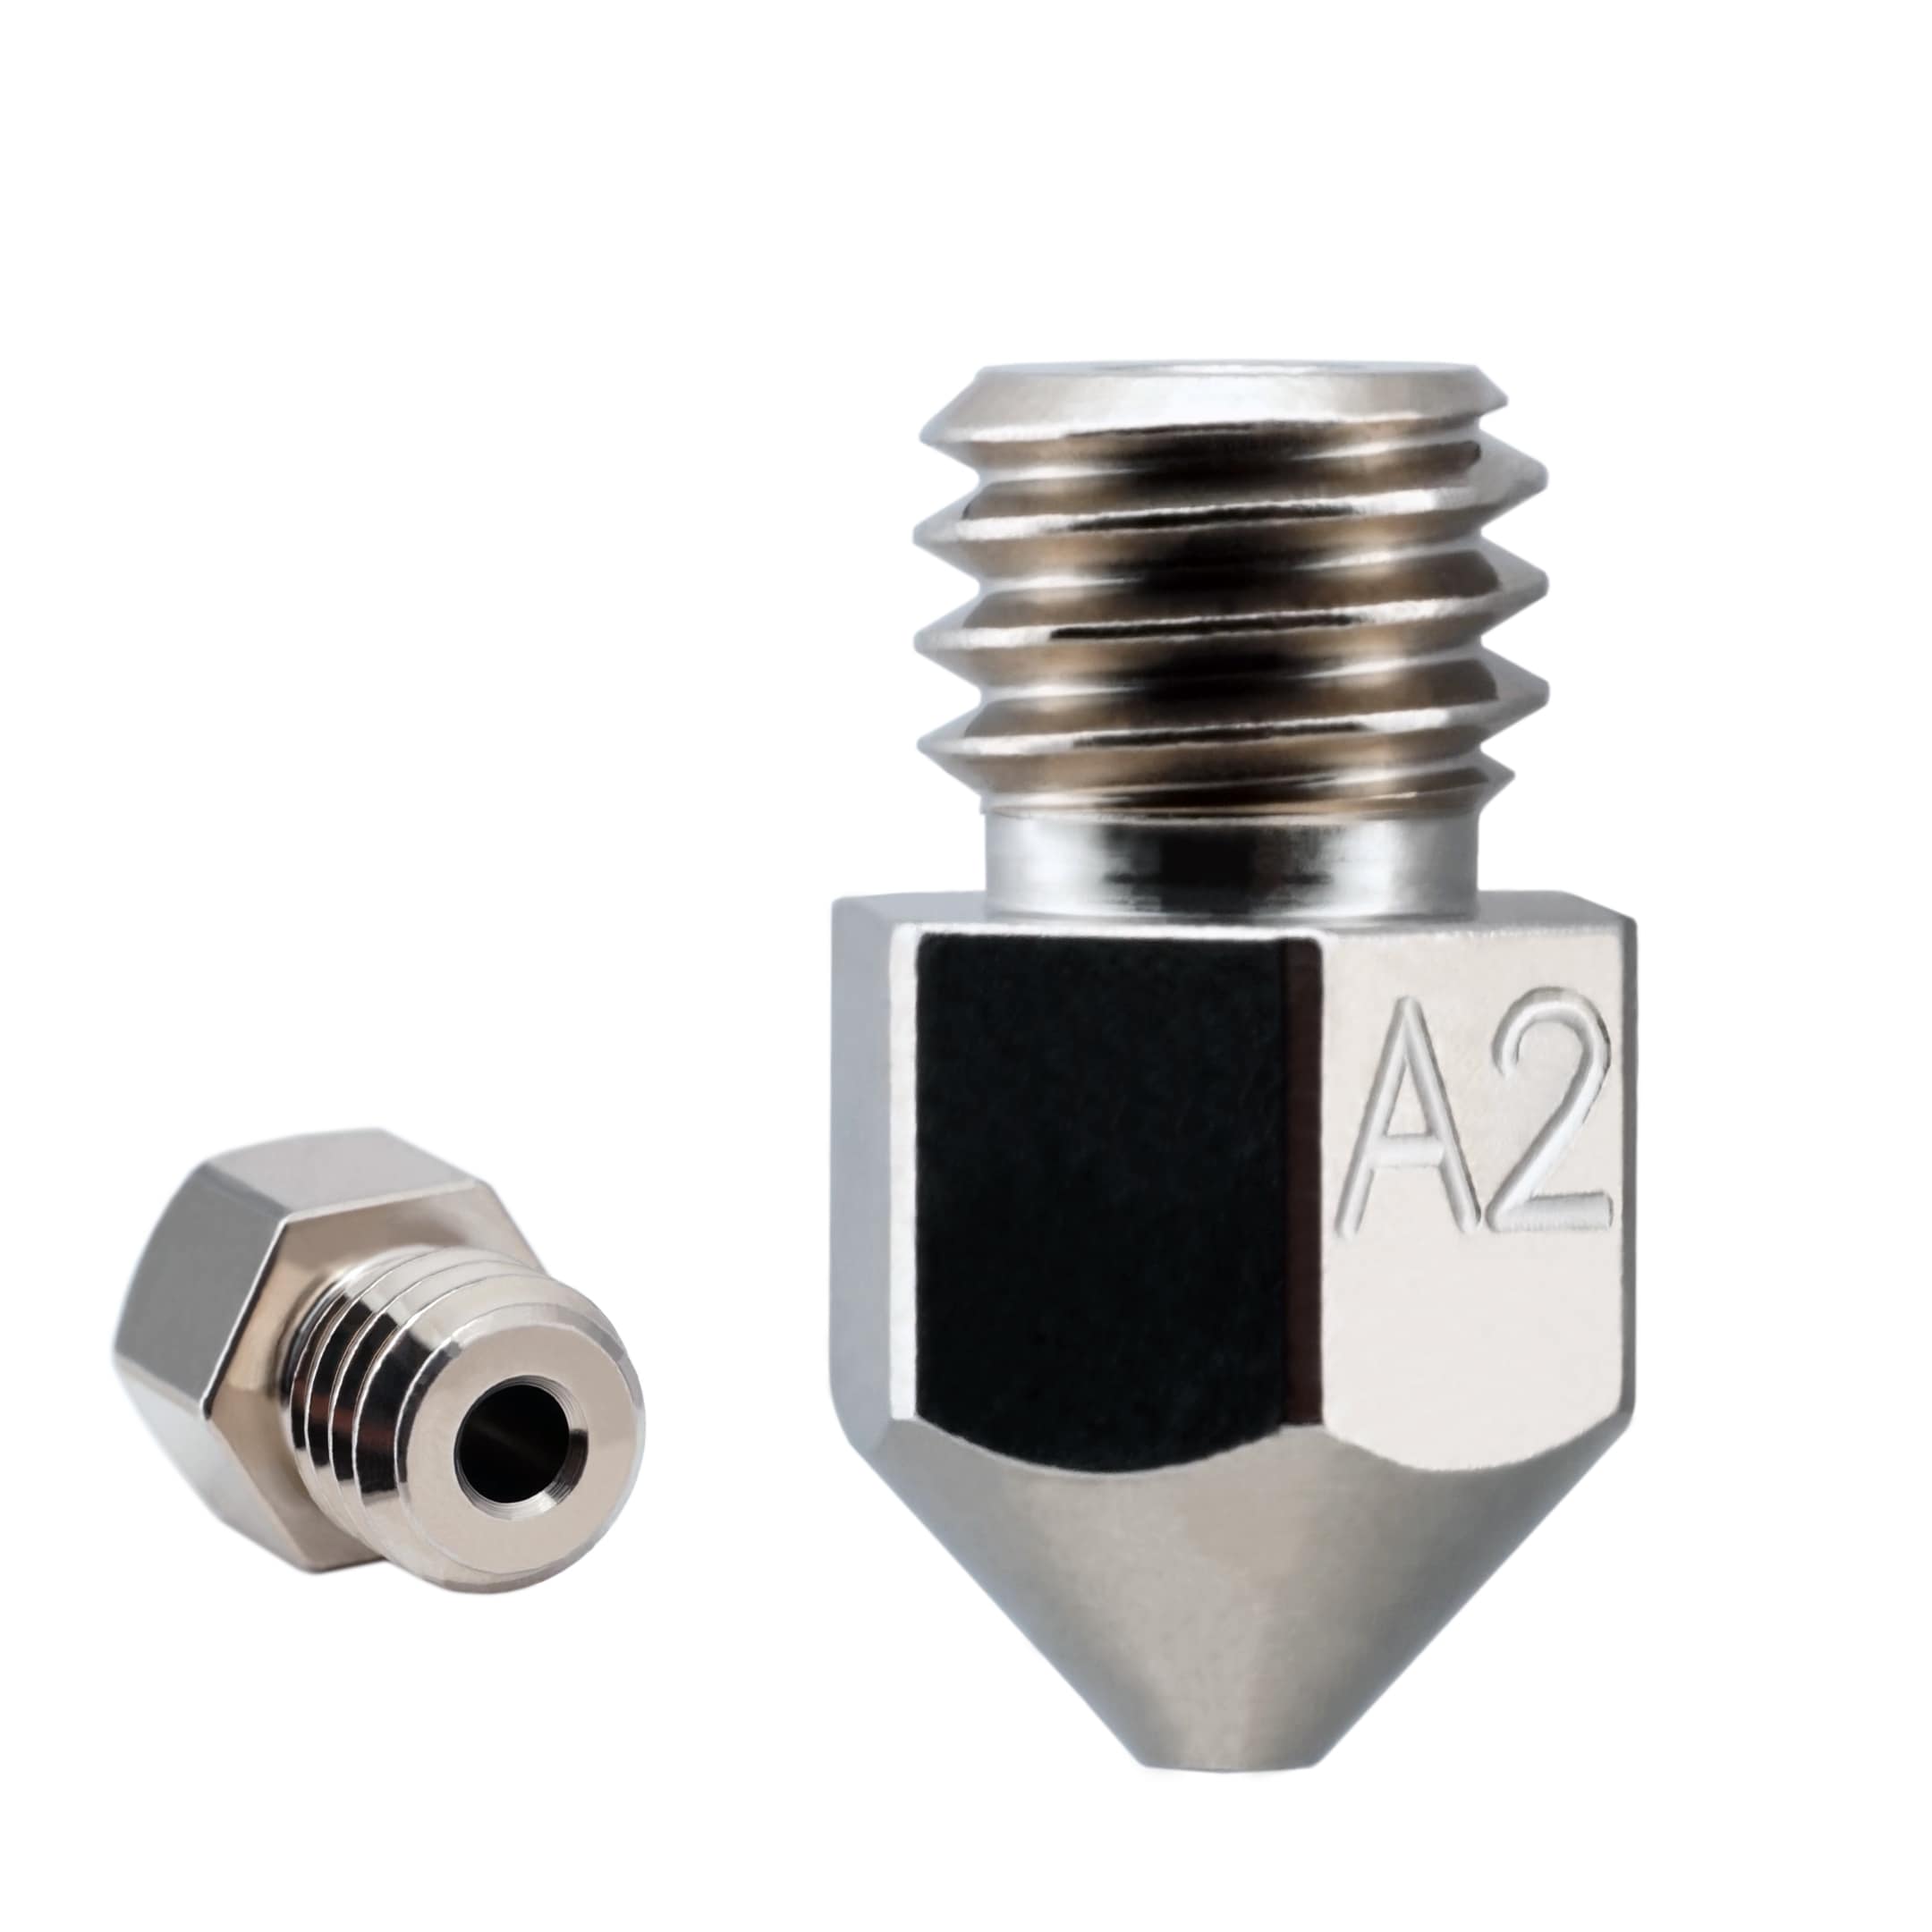 Micro Swiss A2 Hardened Steel Nozzle for MK8 (CR10 / Ender / Tornado / MakerBot)